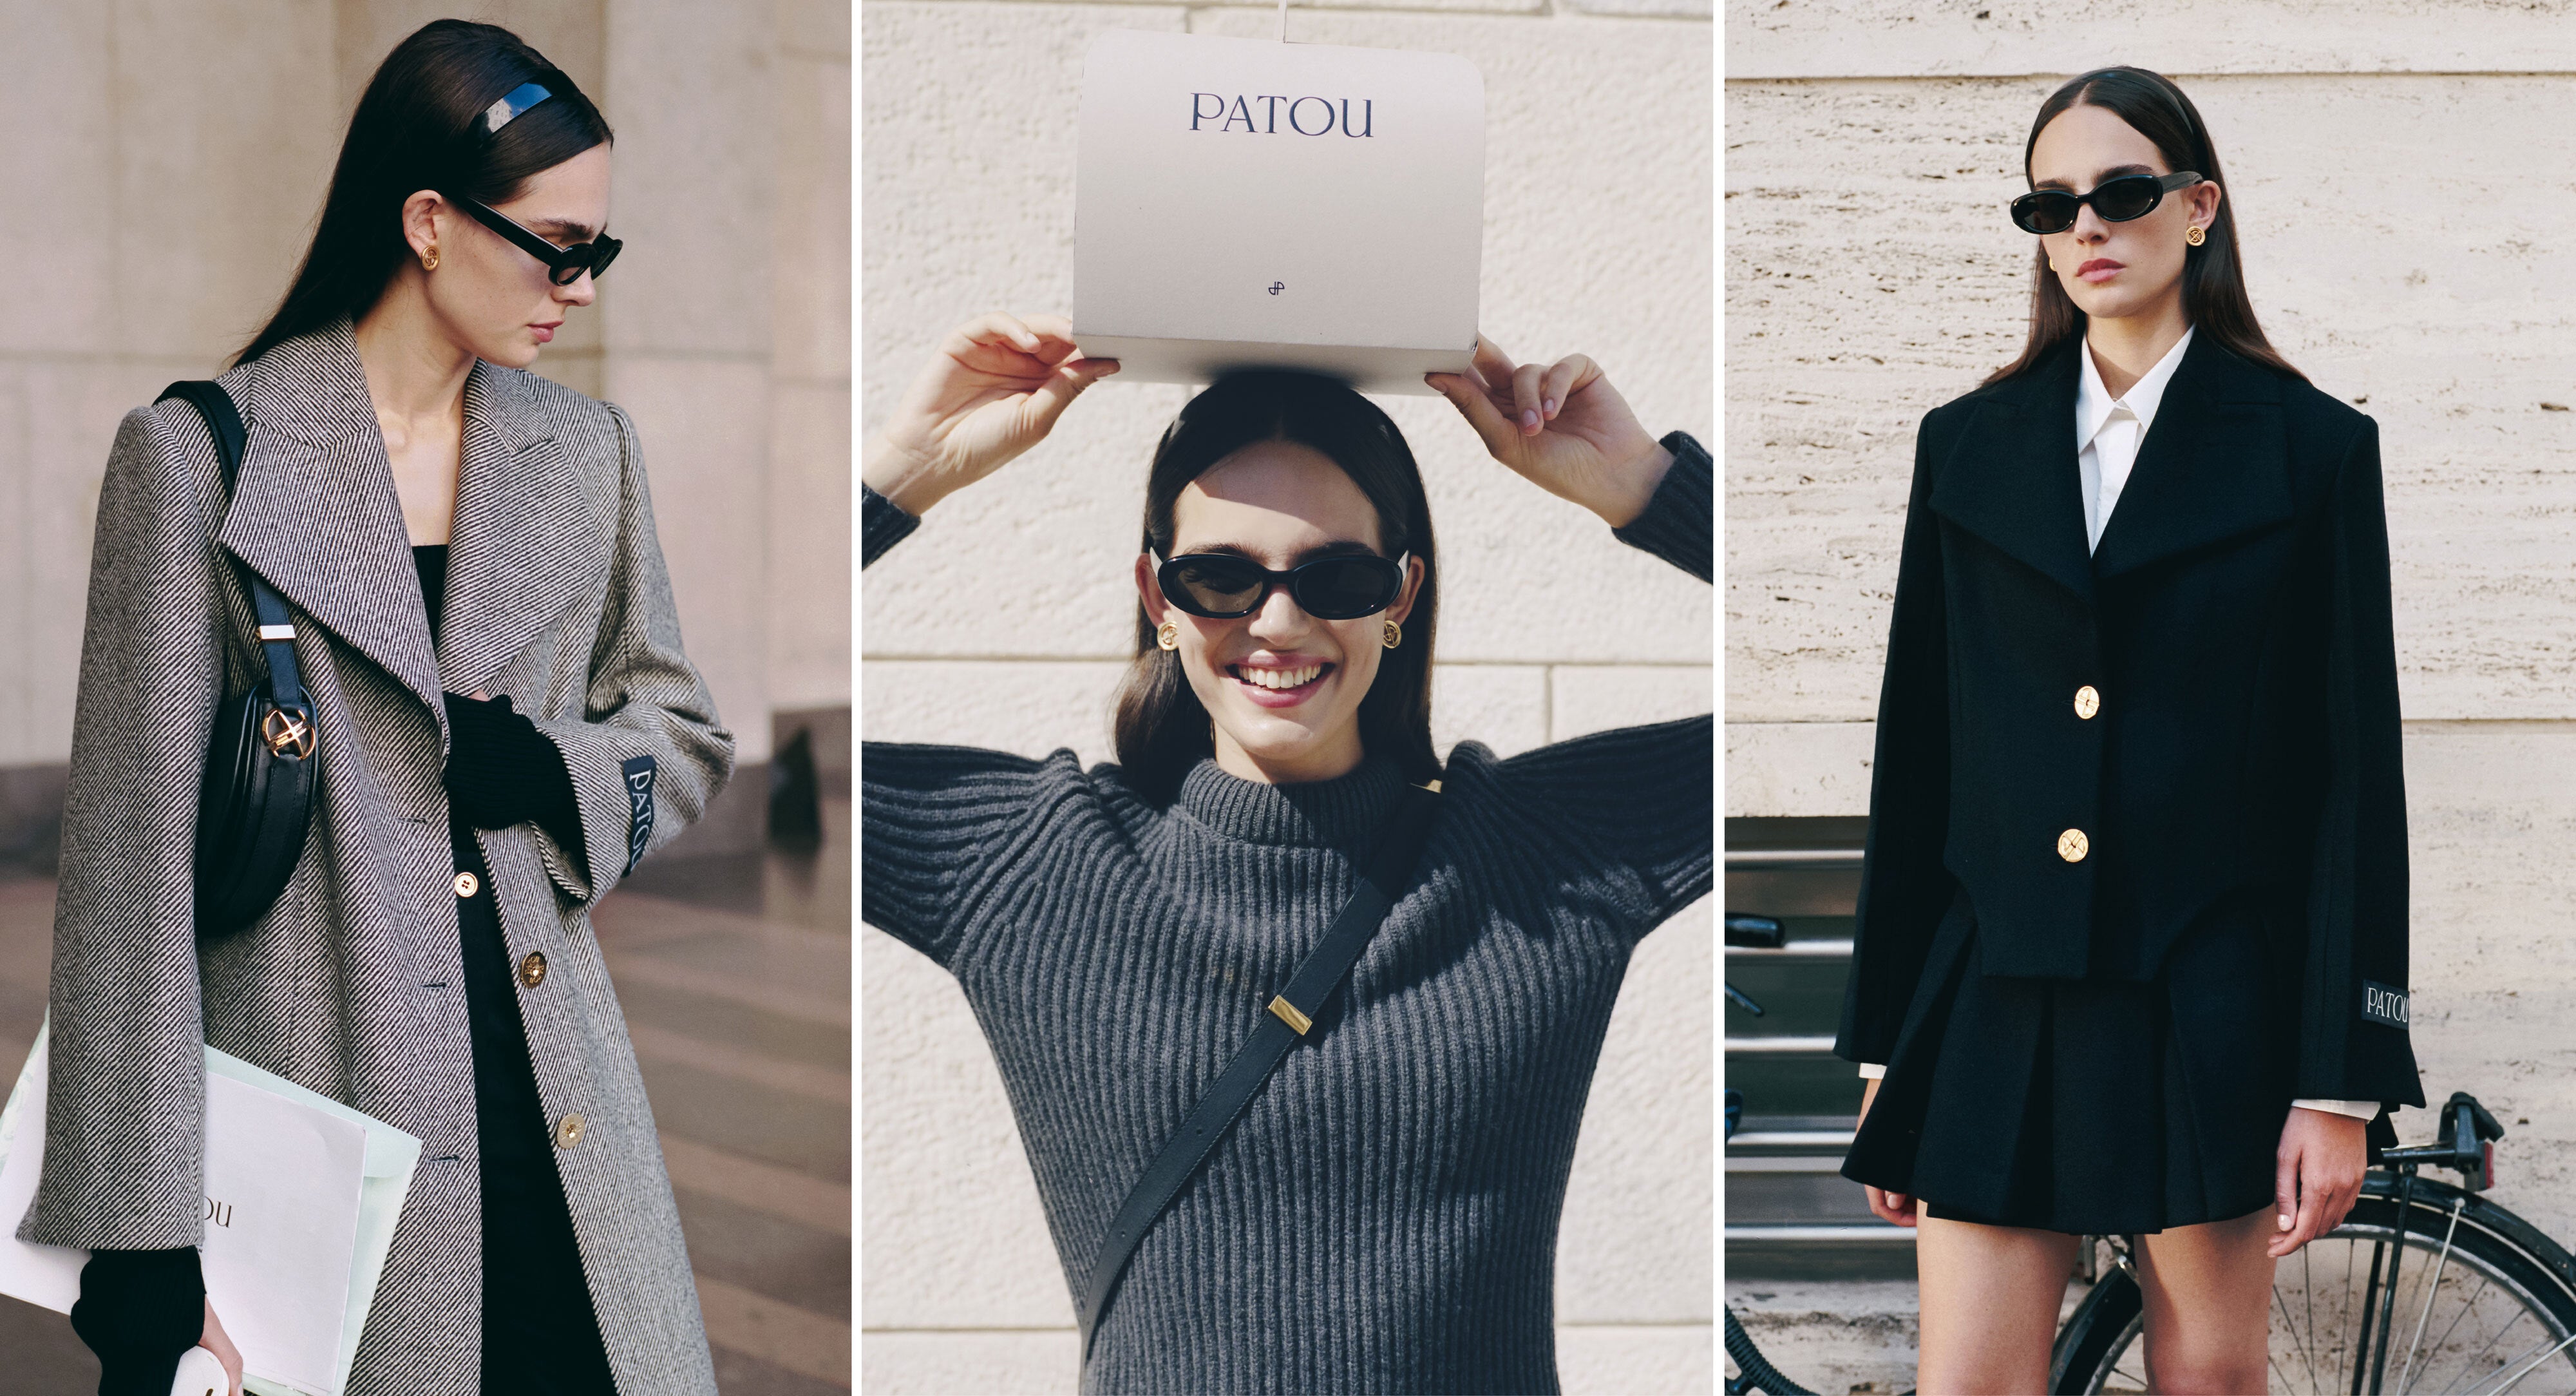 Patou | Official Website | Ready-to-wear & accessories for women